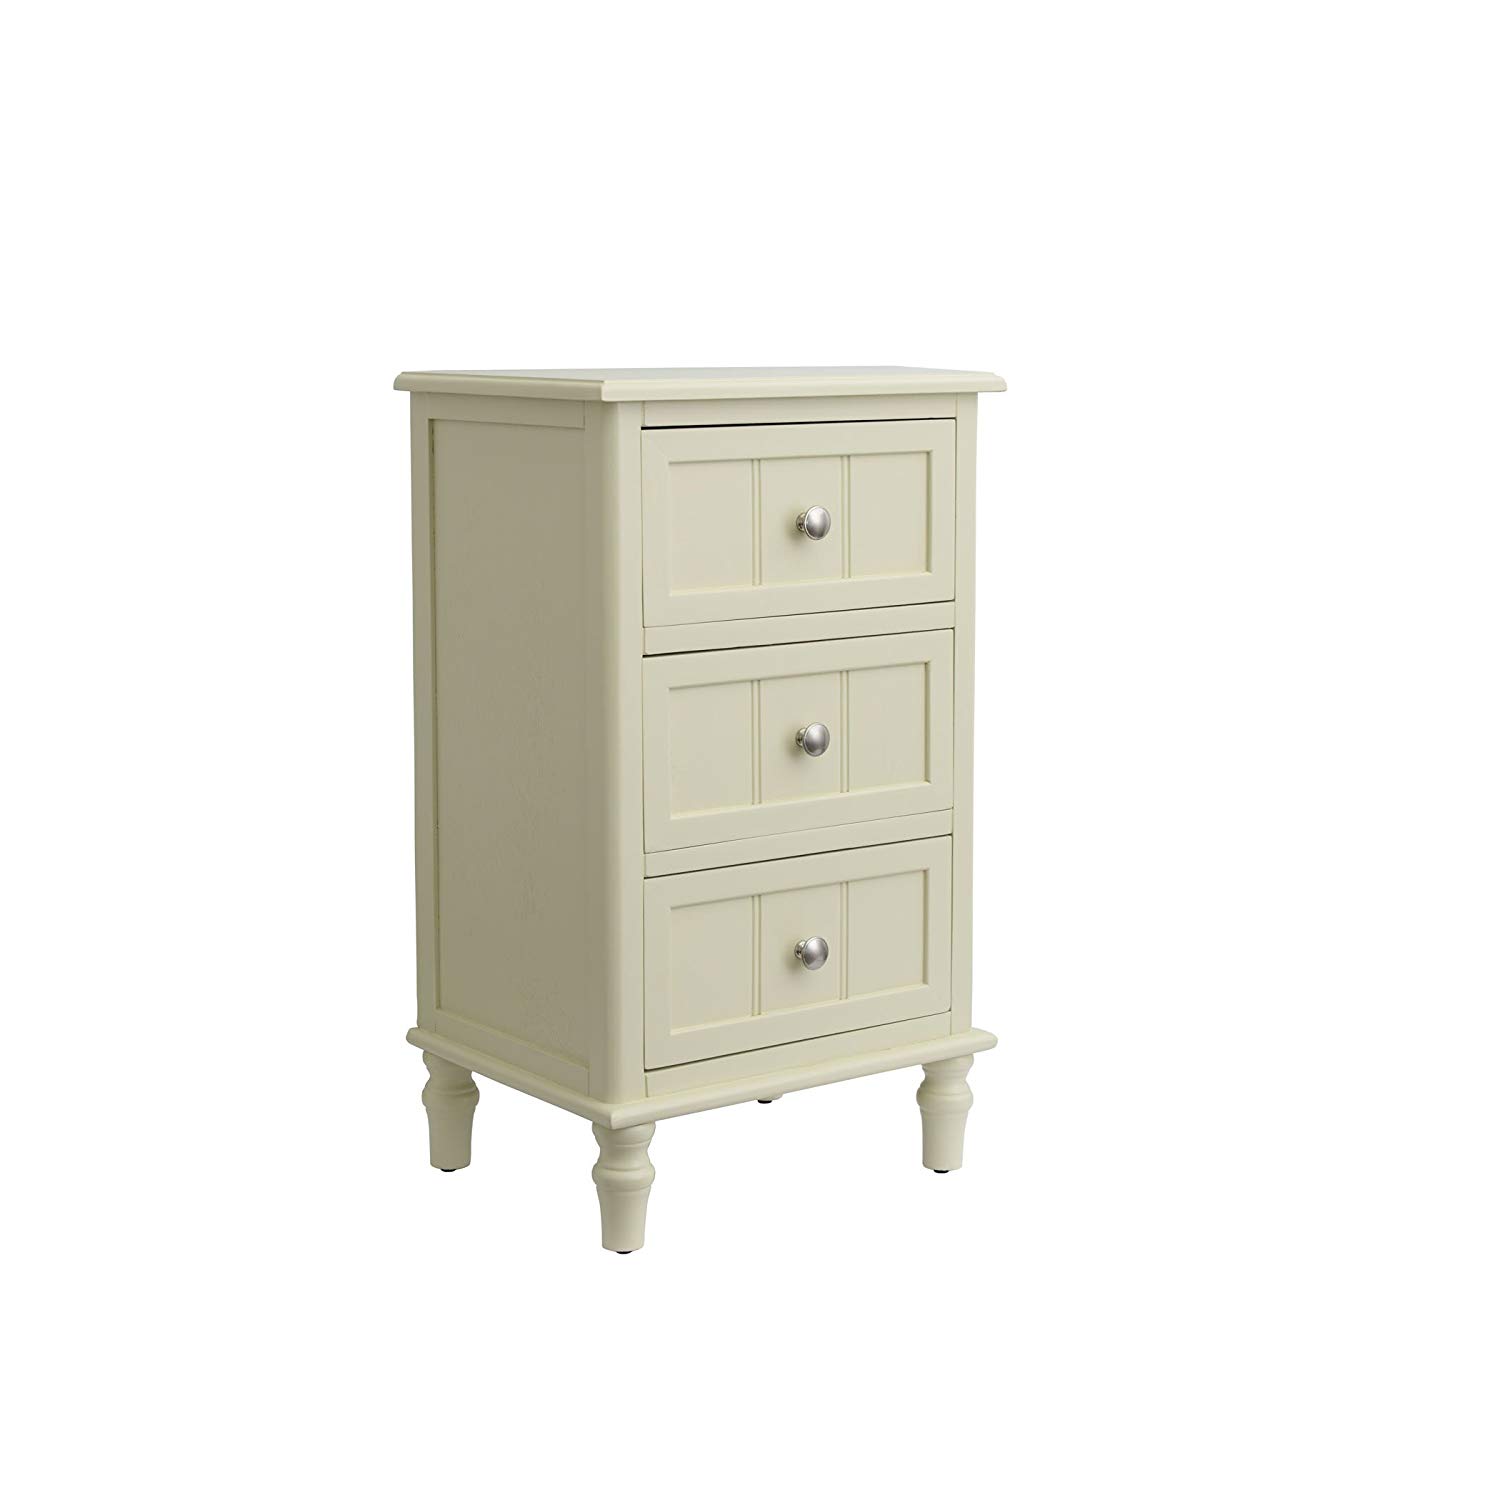 decor therapy buttermilk finish end table accent tables and chests kitchen dining pottery barn cart coffee living room classic lamps oriental small storage cupboard grey wash wood